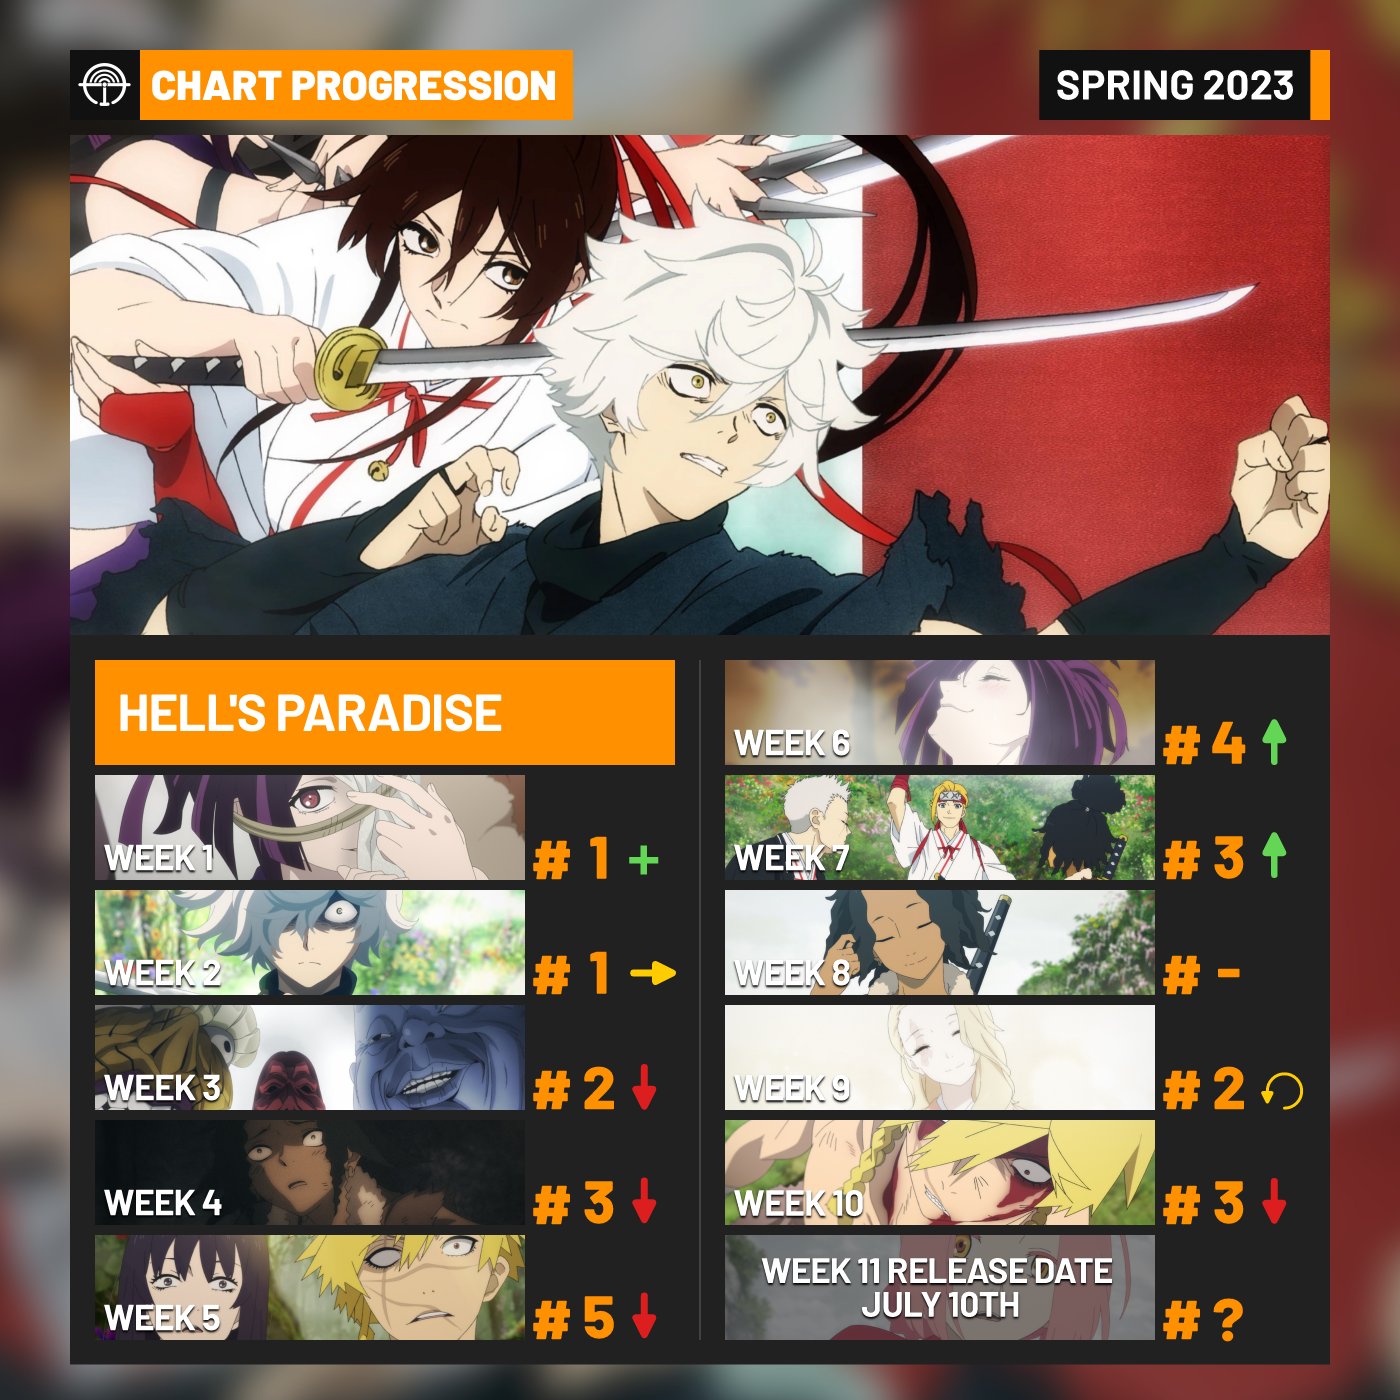 Hell's Paradise EN on X: ◥◣STREAMING TODAY◢◤ Unstoppable Tenza and Nurugai  tonight! Find out more on TV anime #HellsParadise Episode 5 Samurai and  Woman Streaming on Netflix and Crunchyroll from today📺 #HellsParadise #